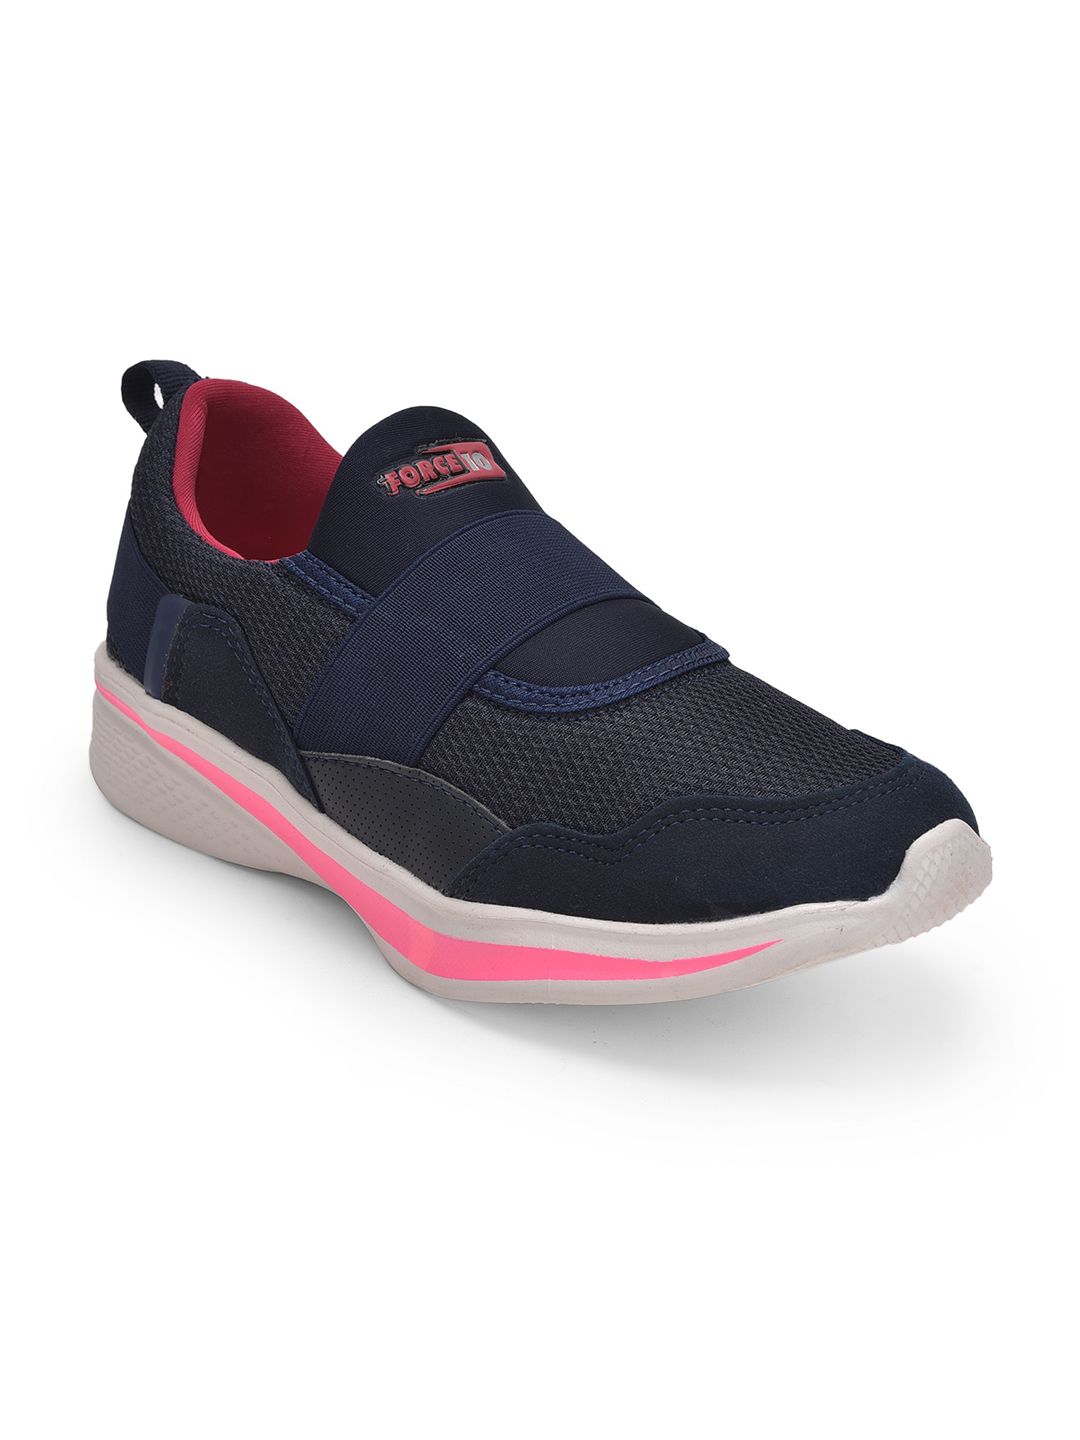 Liberty Women Navy Blue Running Non-Marking Shoes Price in India